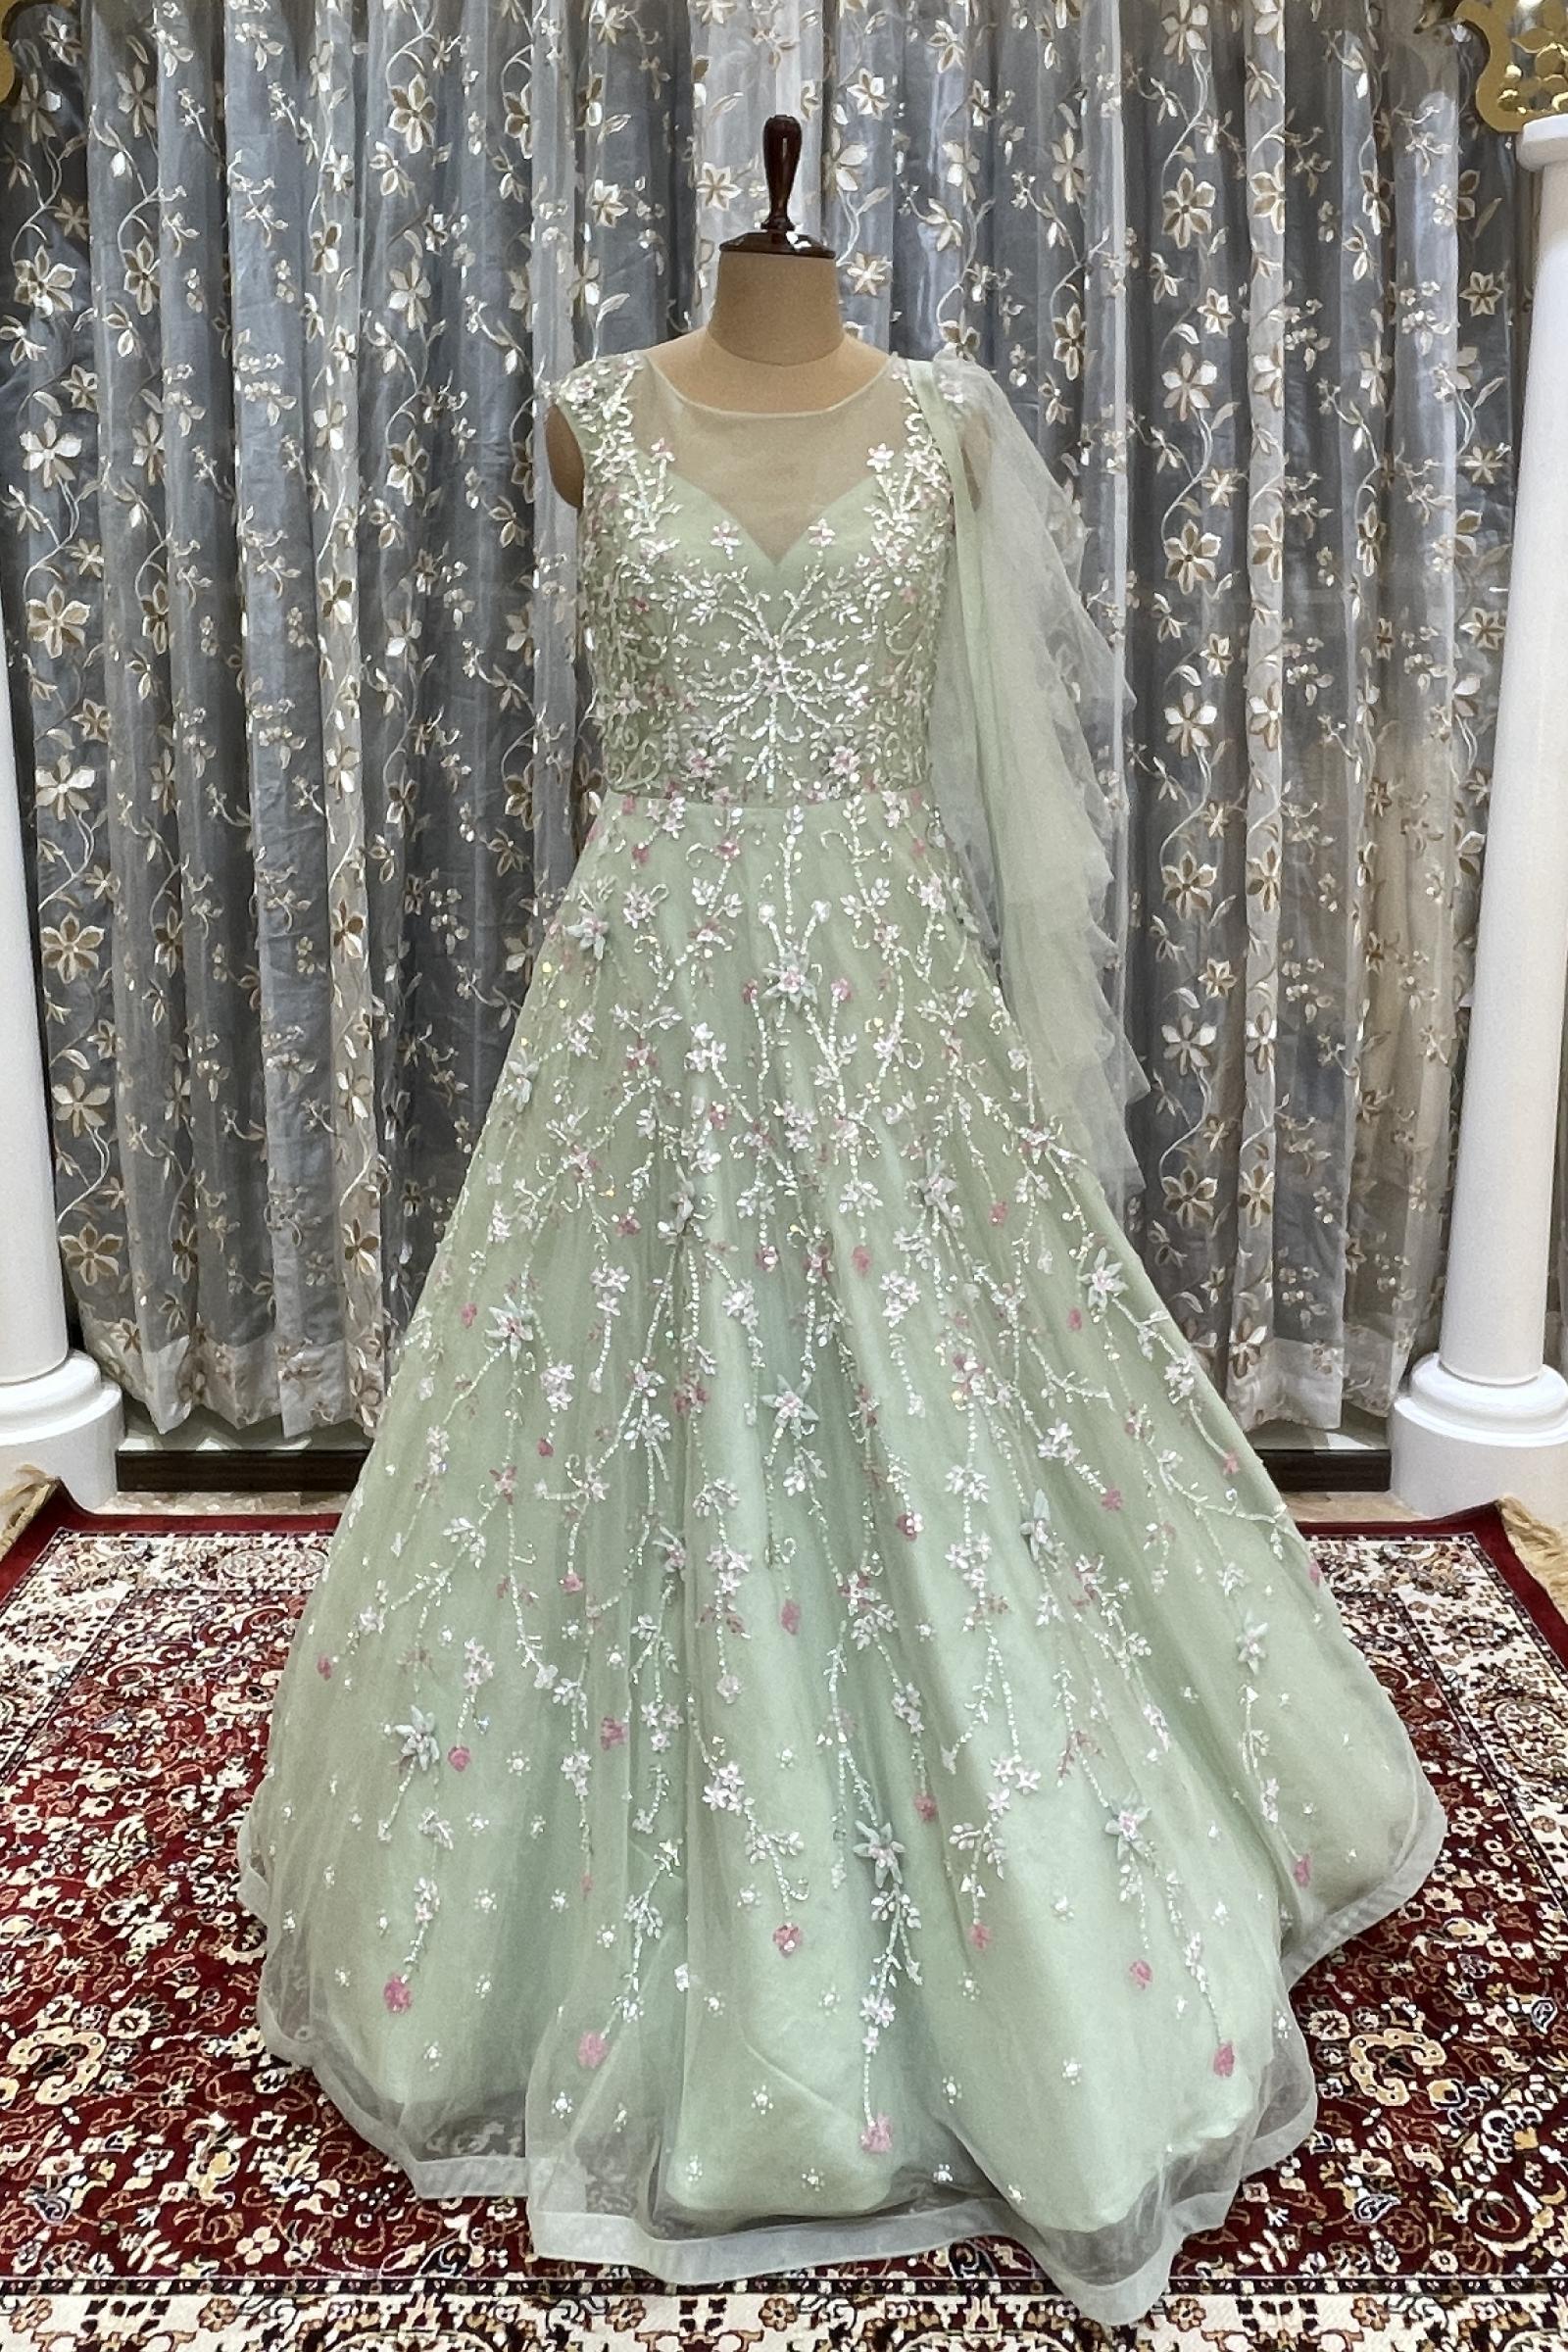 Mint Green Ball Gown Year Lace Applique Wedding Dresses 2019 Off Shoulder  Pearls Plus Size Bridal Wedding Gowns From Cinderelladress, $153.85 |  DHgate.Com